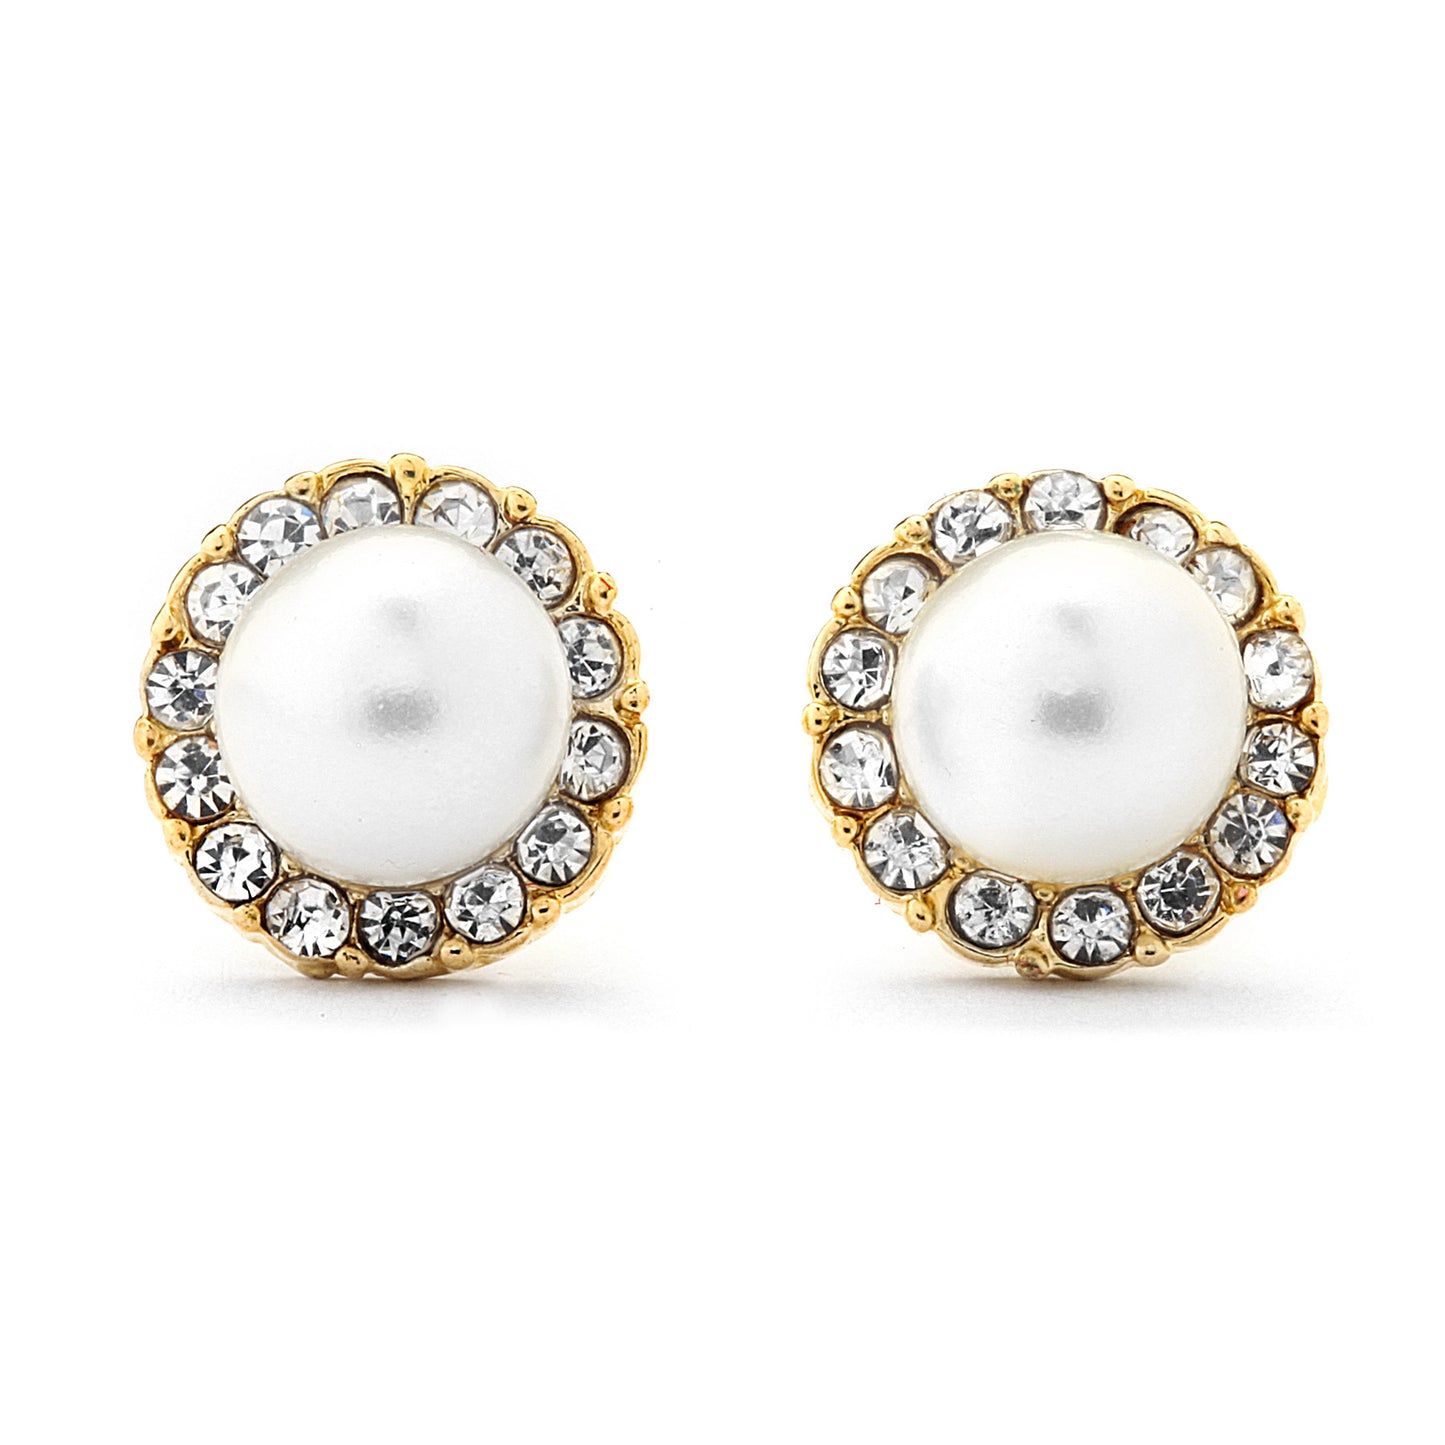 Pearl with Pave CZ Earrings - 14-kt Gold Filled